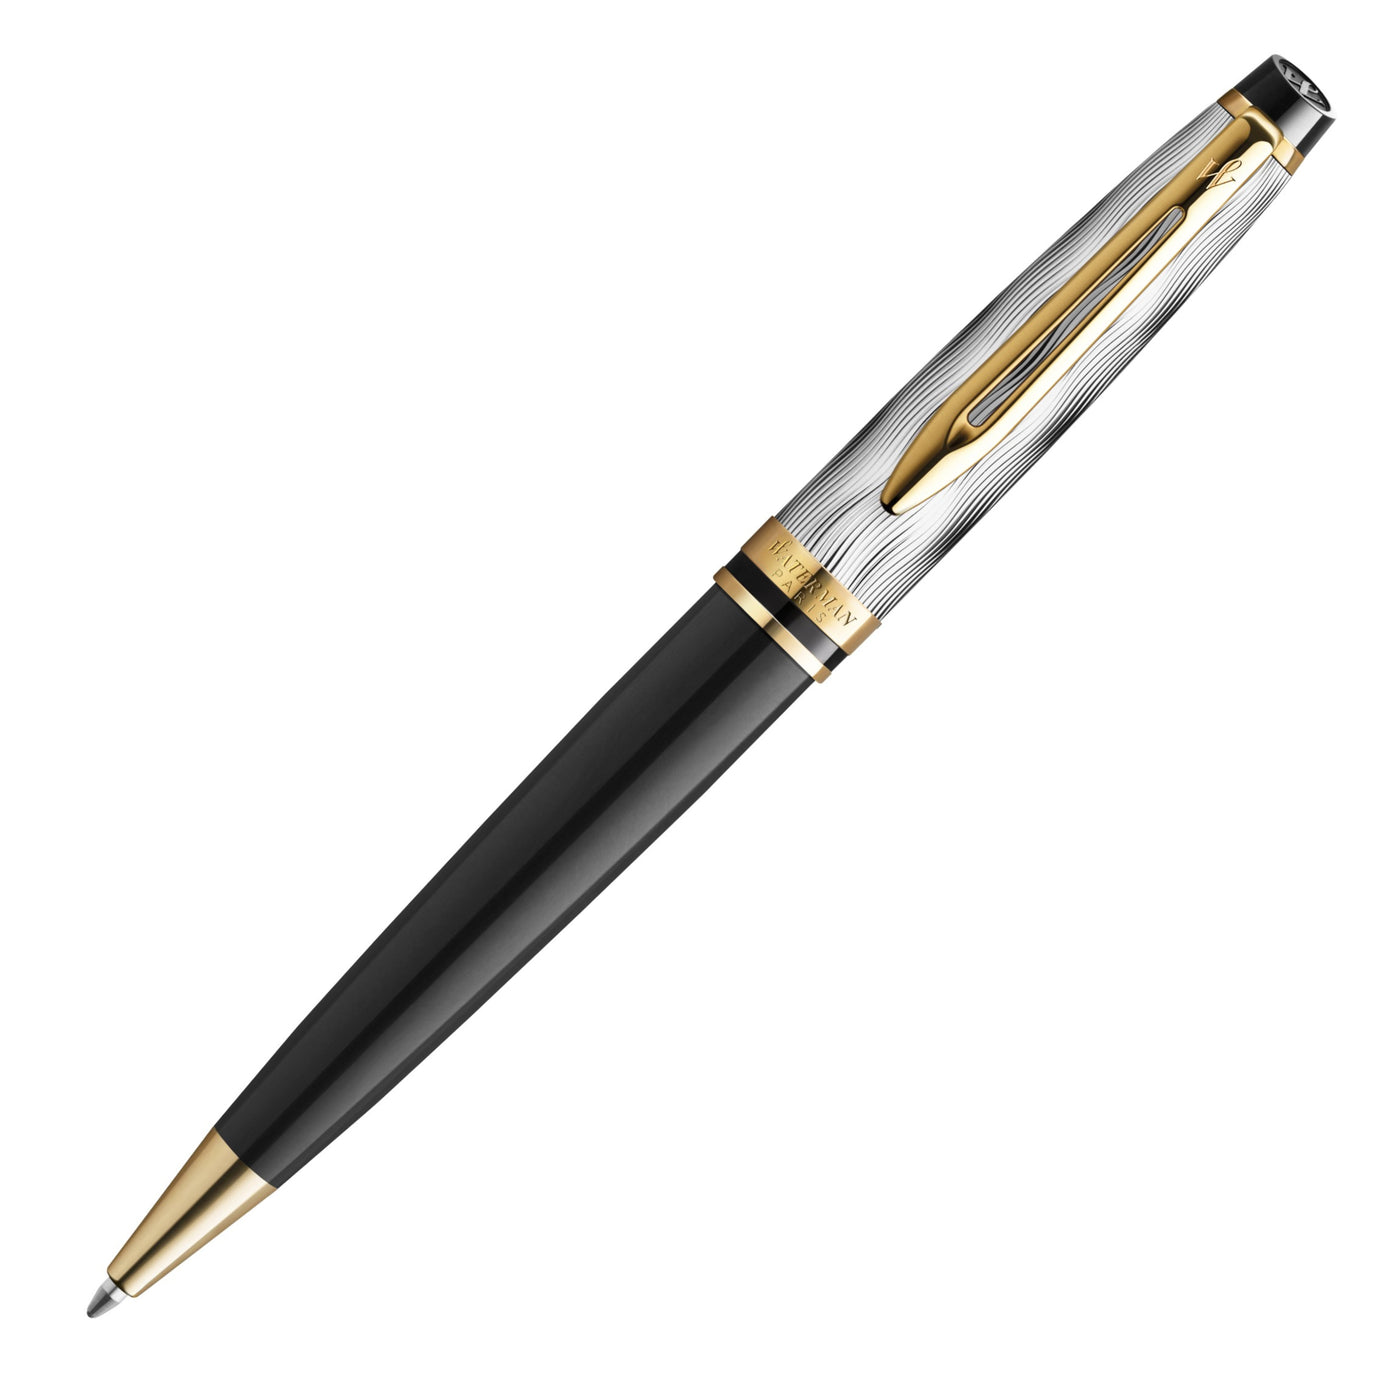 Waterman Expert Ballpoint Pen - Reflections of Paris (Special Edition)